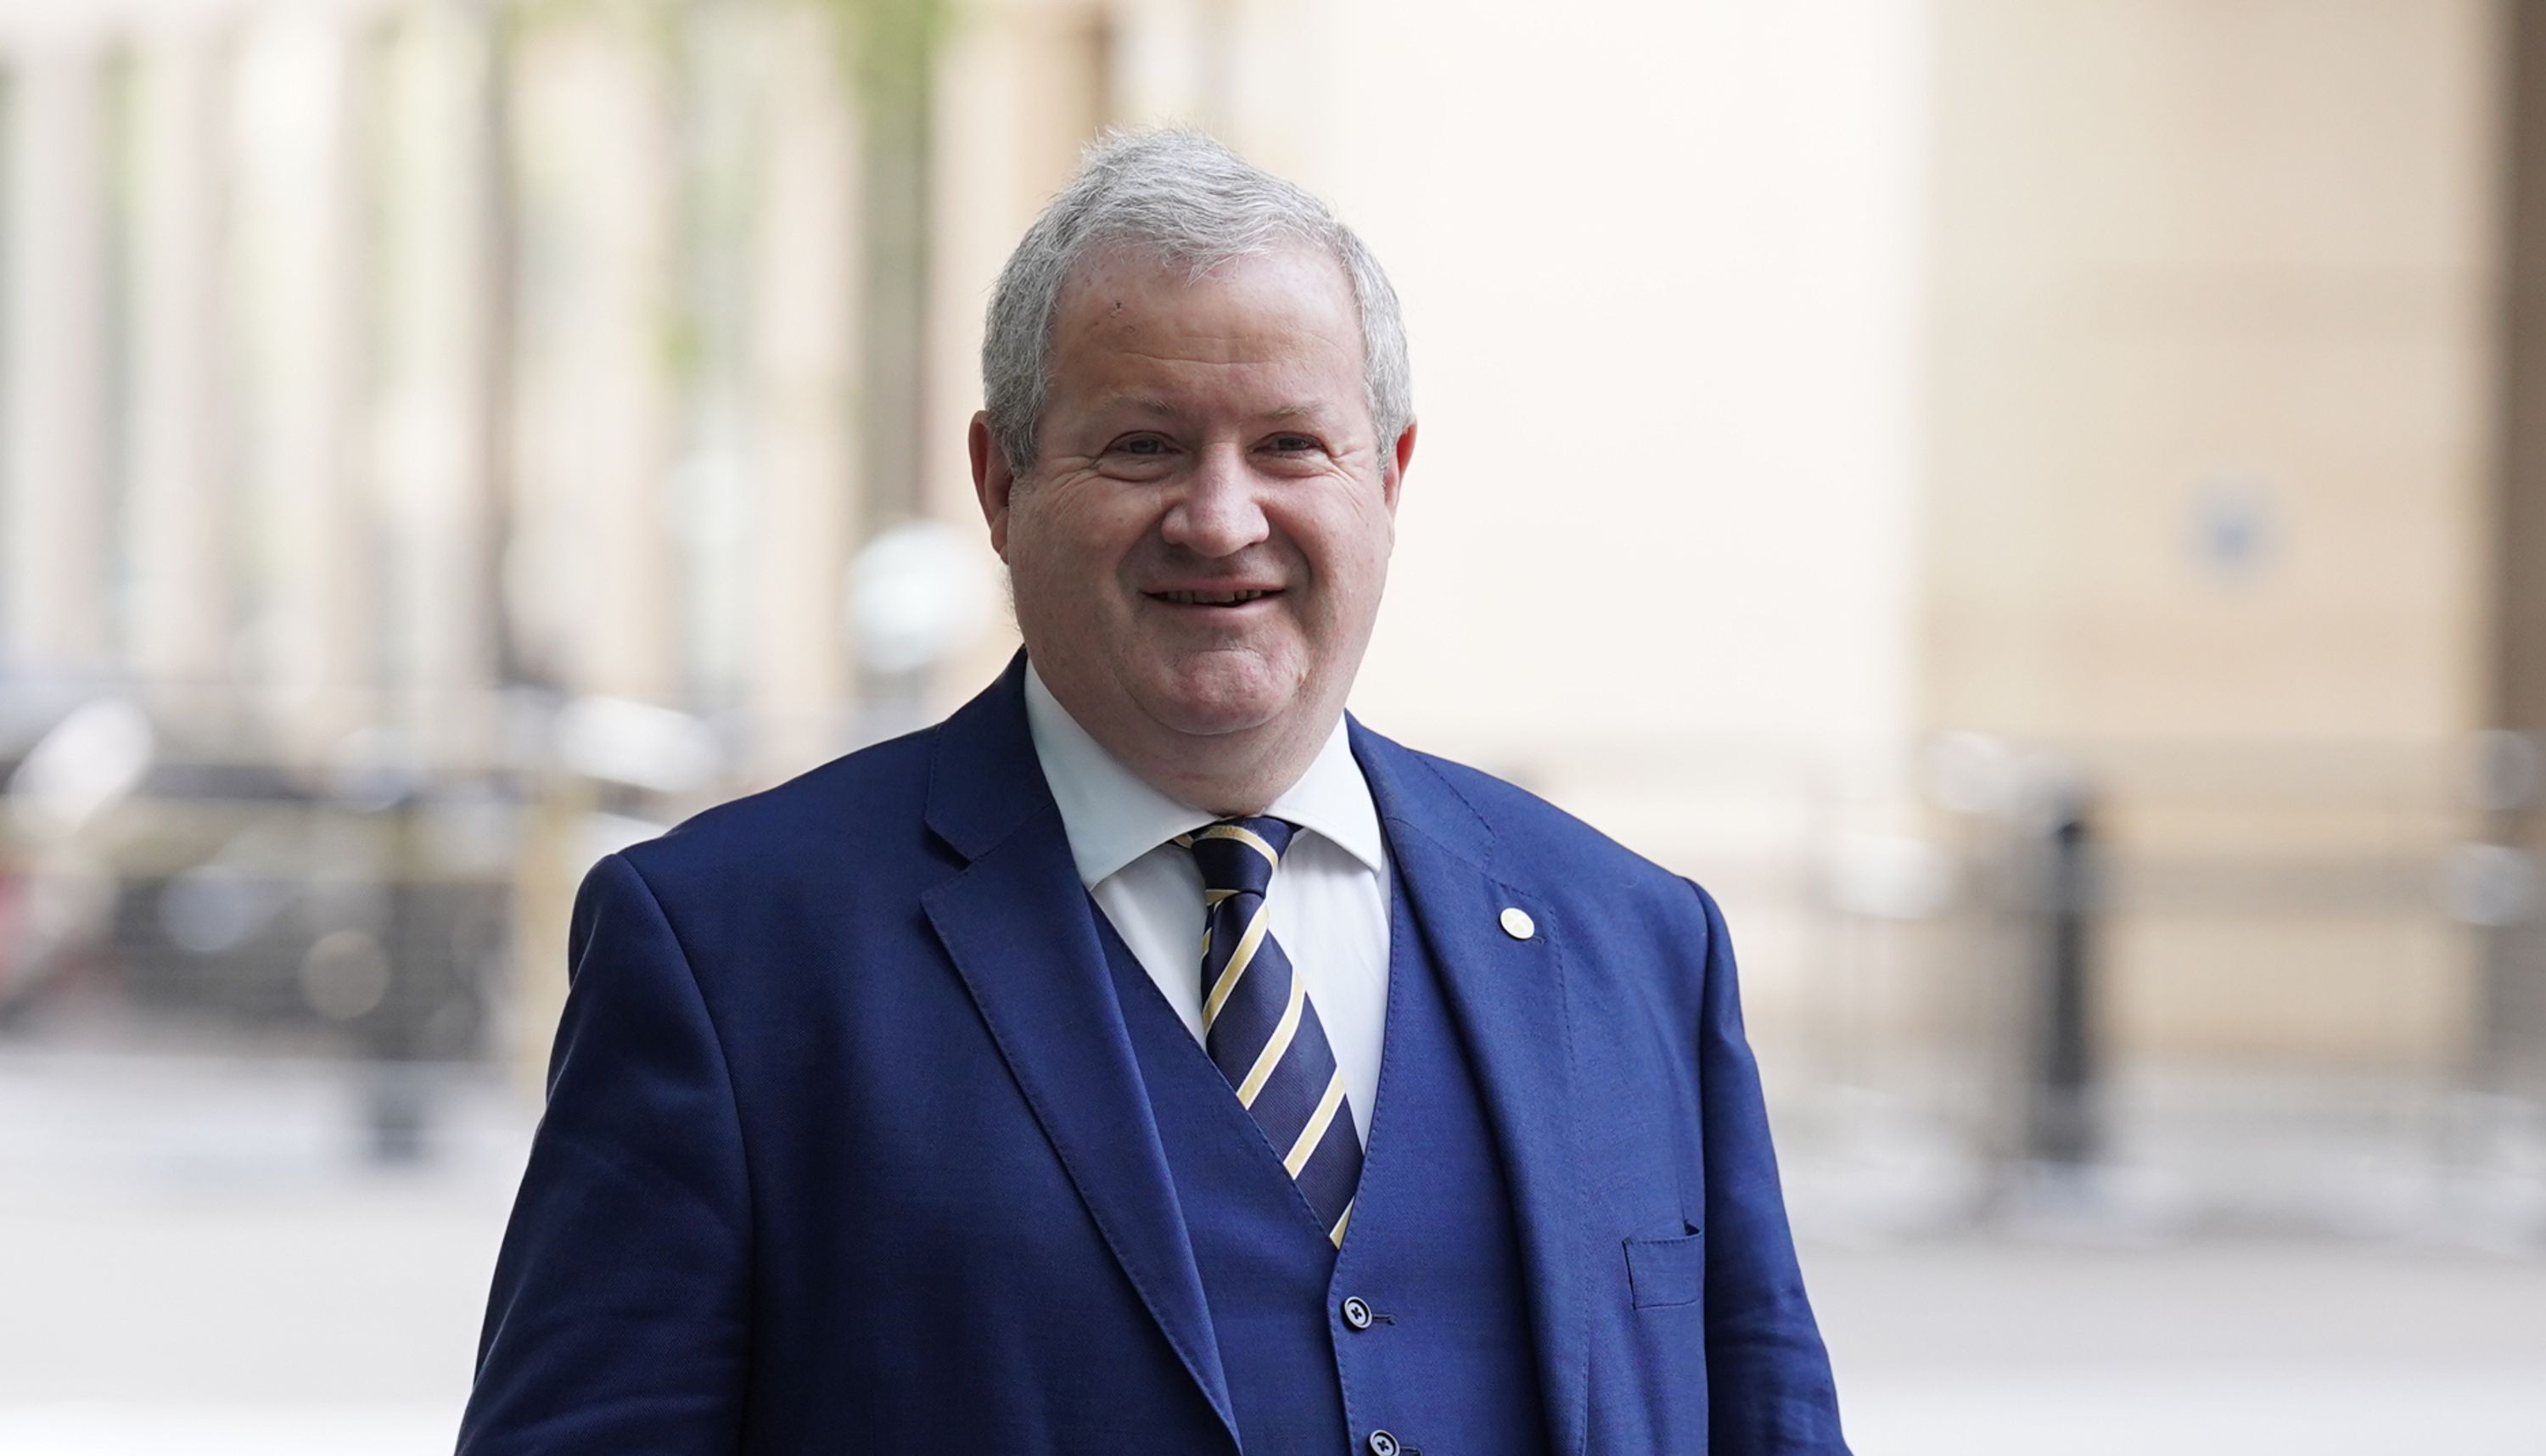 SNP Westminster leader Ian Blackford arrives at BBC Broadcasting House in London, to appear on the BBC One current affairs programme, Sunday Morning hosted by Sophie Raworth. Picture date: Sunday April 24, 2022.